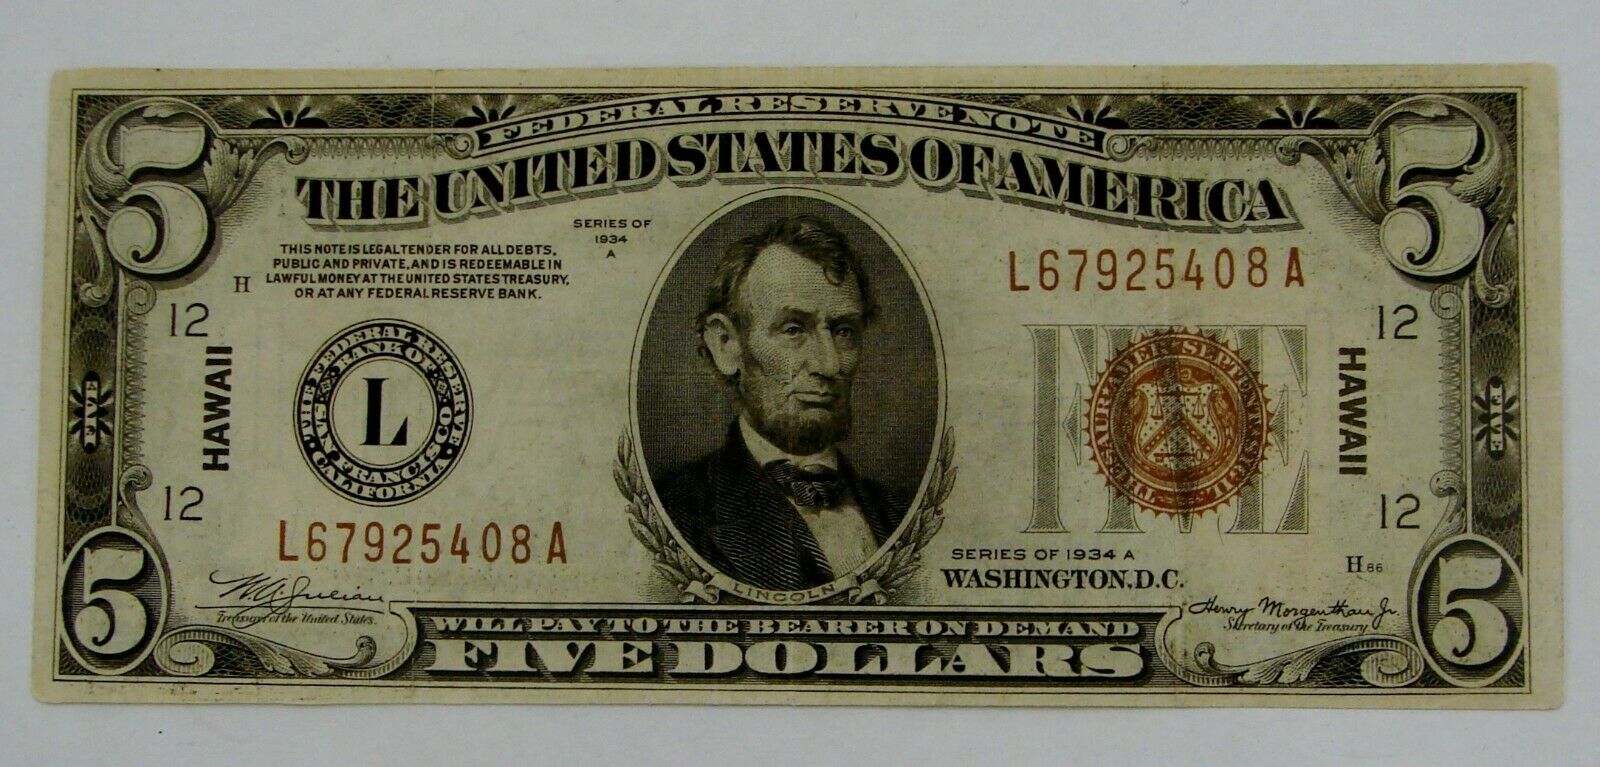 1934 A - Hawaii Emergency Issue $5 Federal Reserve Note - Avg. Circulated